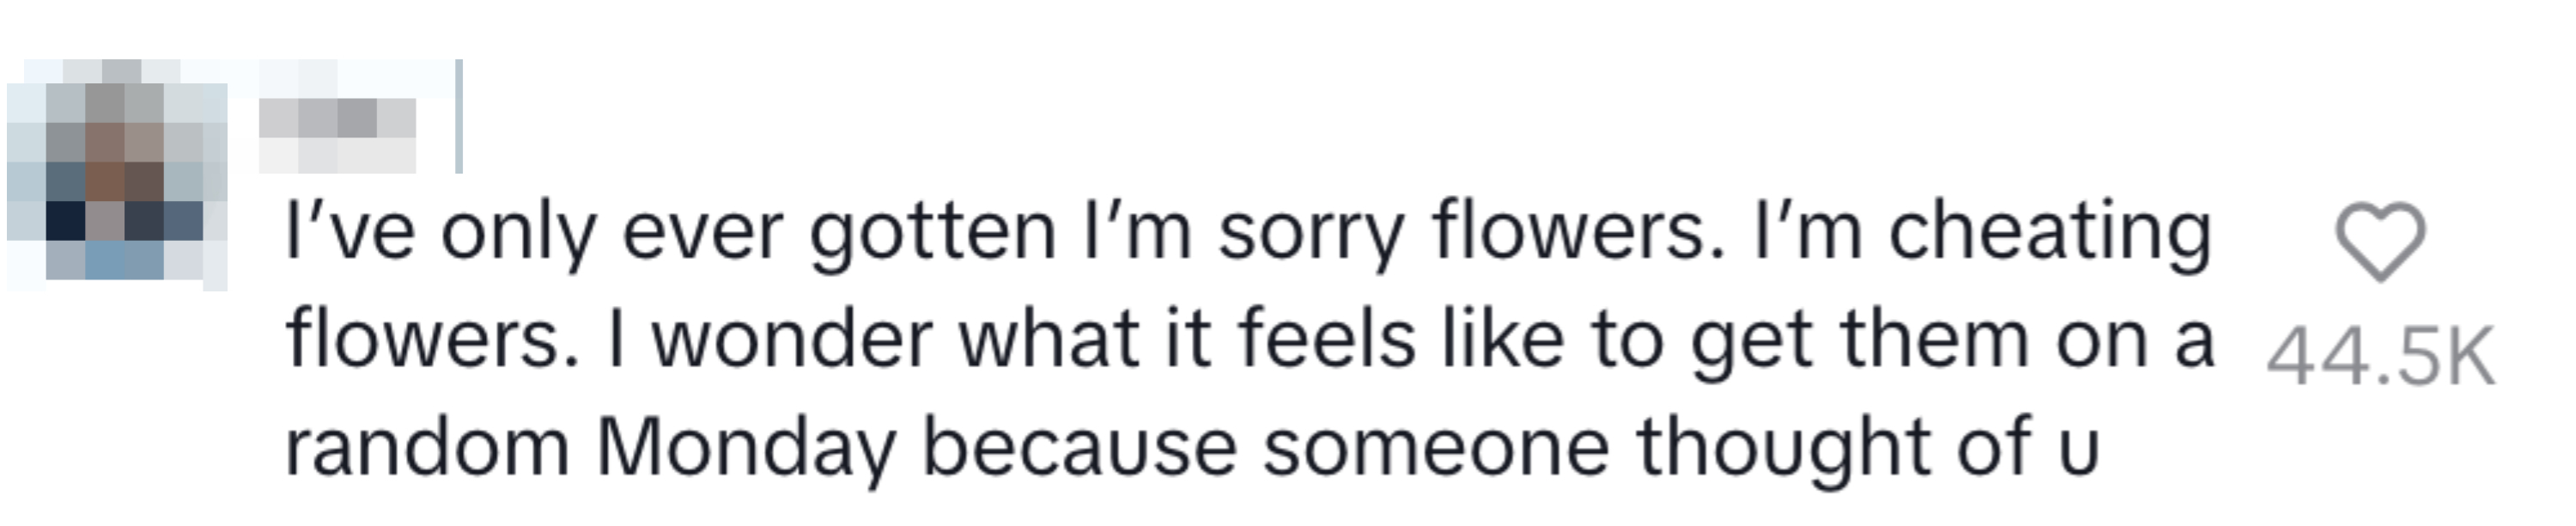 Text in an image: &quot;I&#x27;ve only ever gotten &#x27;I&#x27;m sorry flowers. I&#x27;m cheating flowers. I wonder what it feels like to get them on a random Monday because someone thought of u&quot; Likes and shares stats below